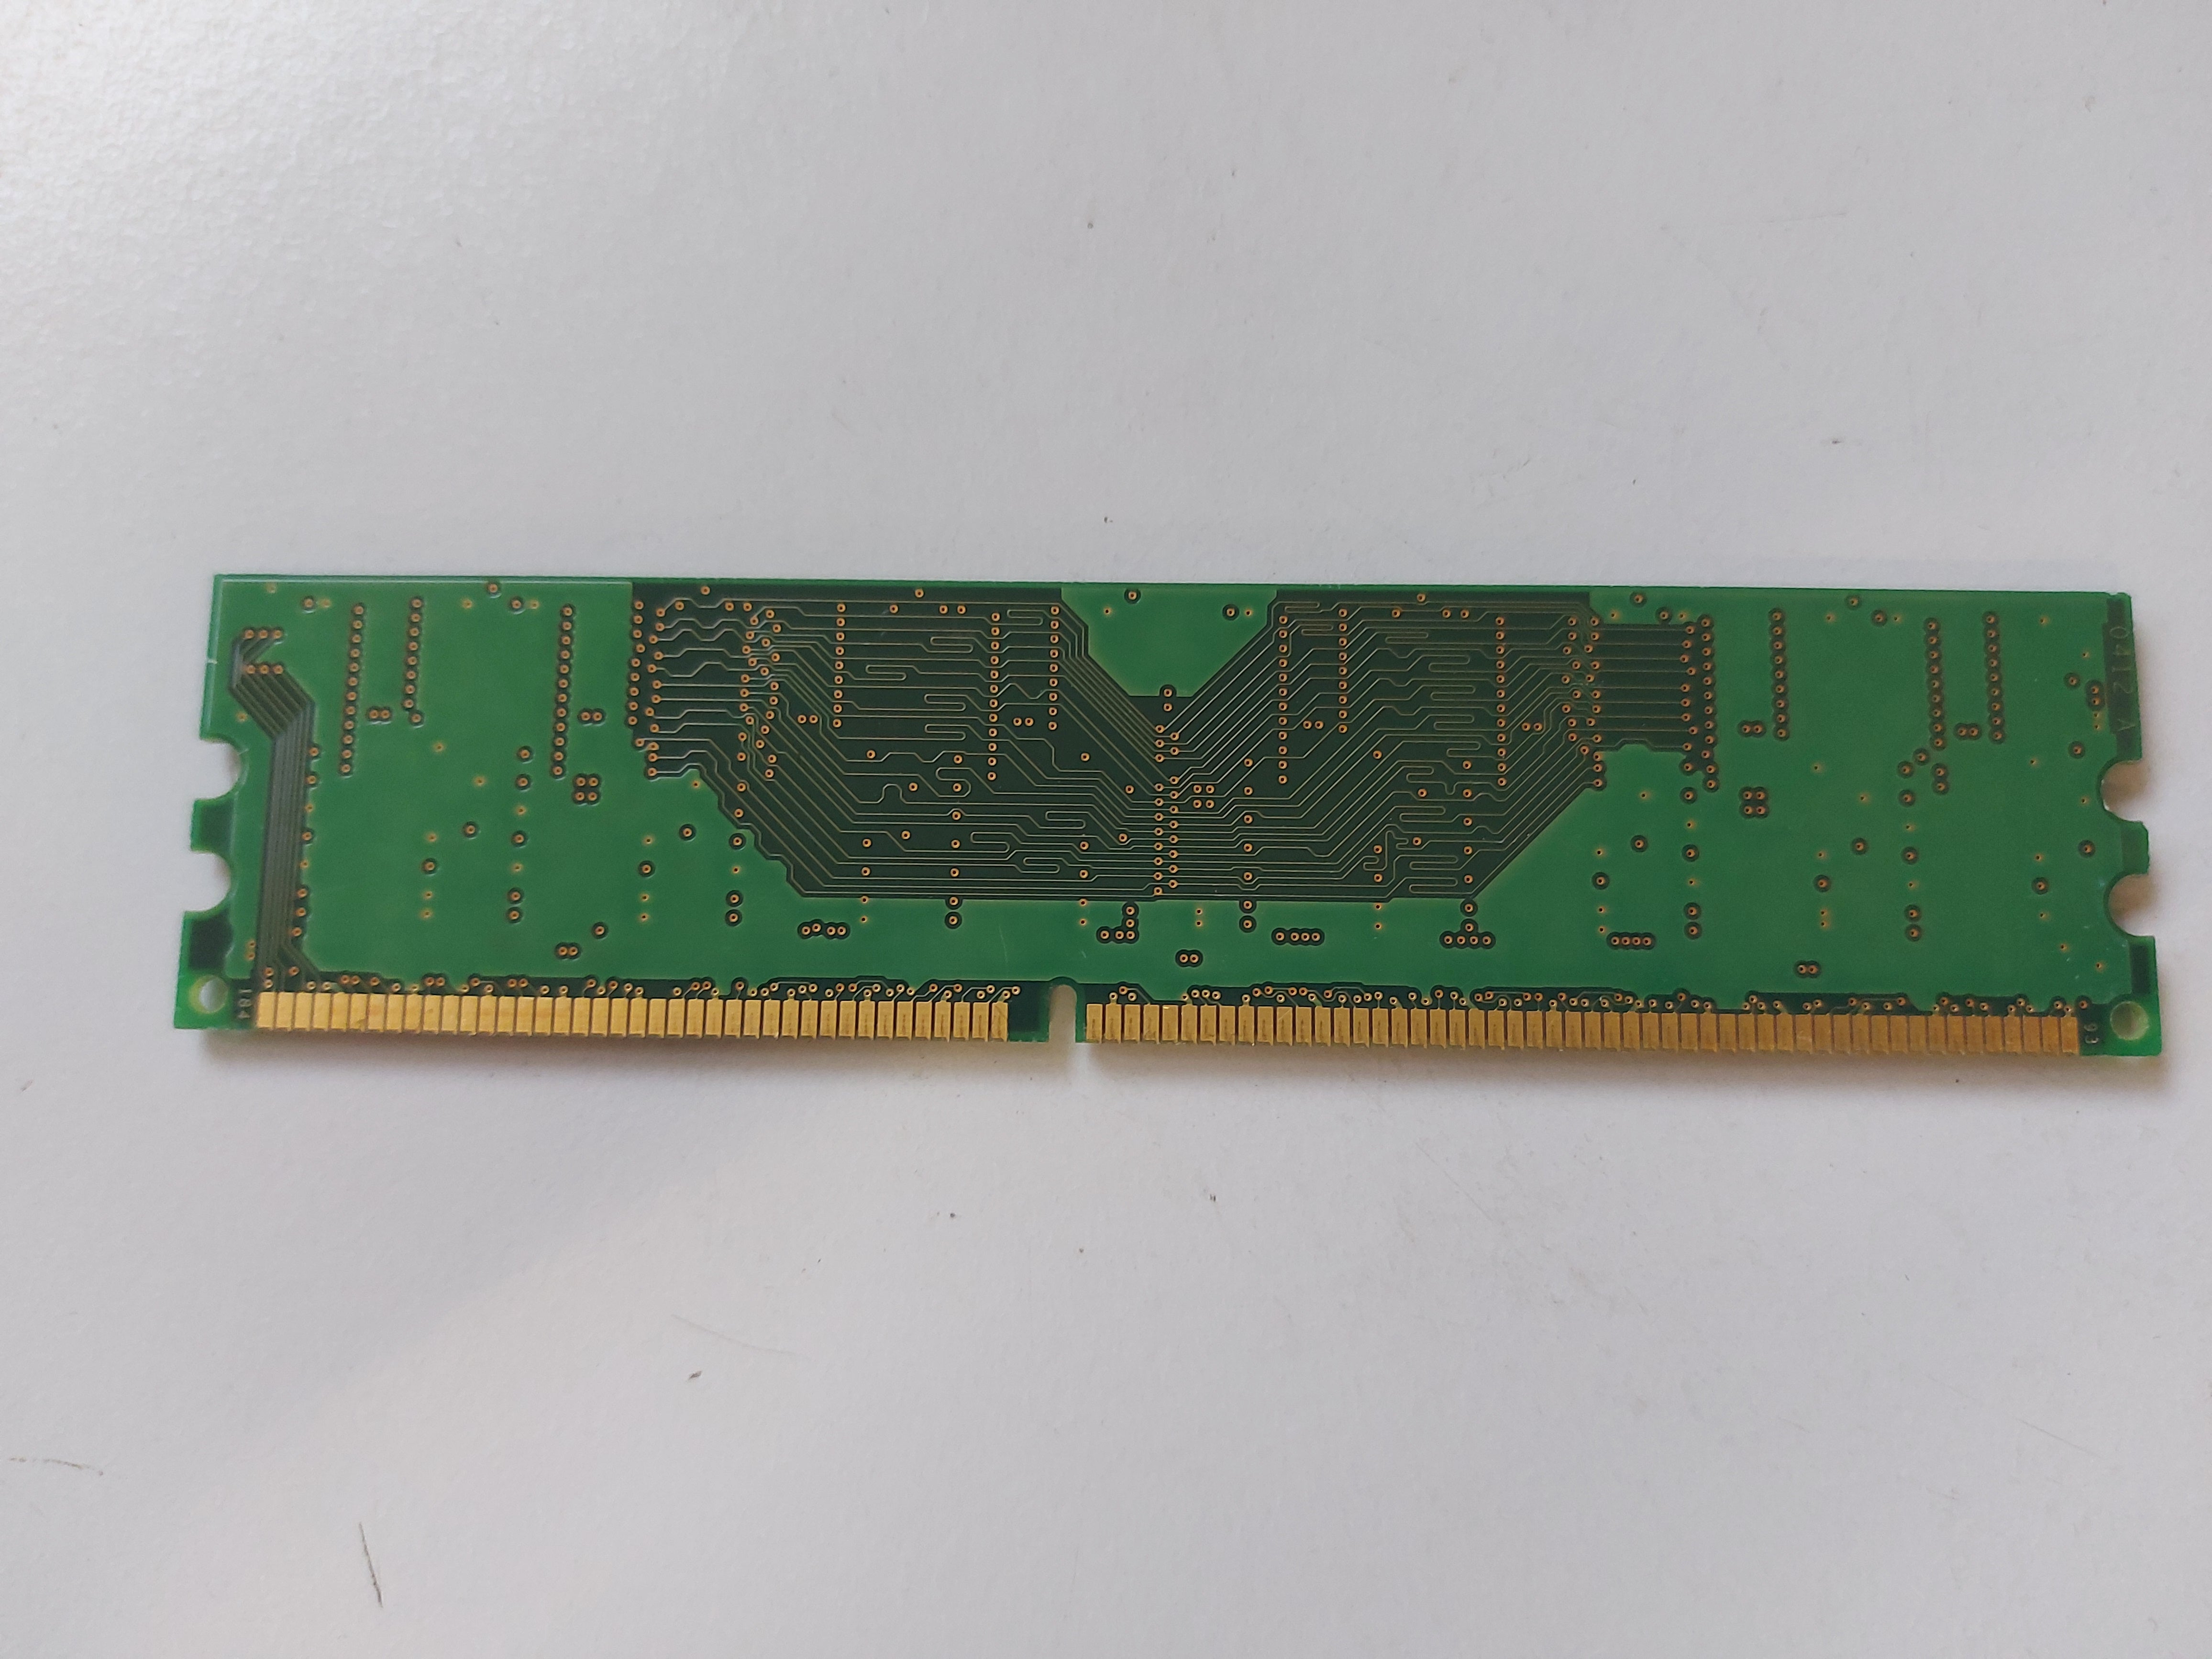 Micron 512MB PC3200 DDR-400MHz non-ECC Unbuffered CL3 184-Pin DIMM ( MT8VDDT6464AY-40BF4 ) REF